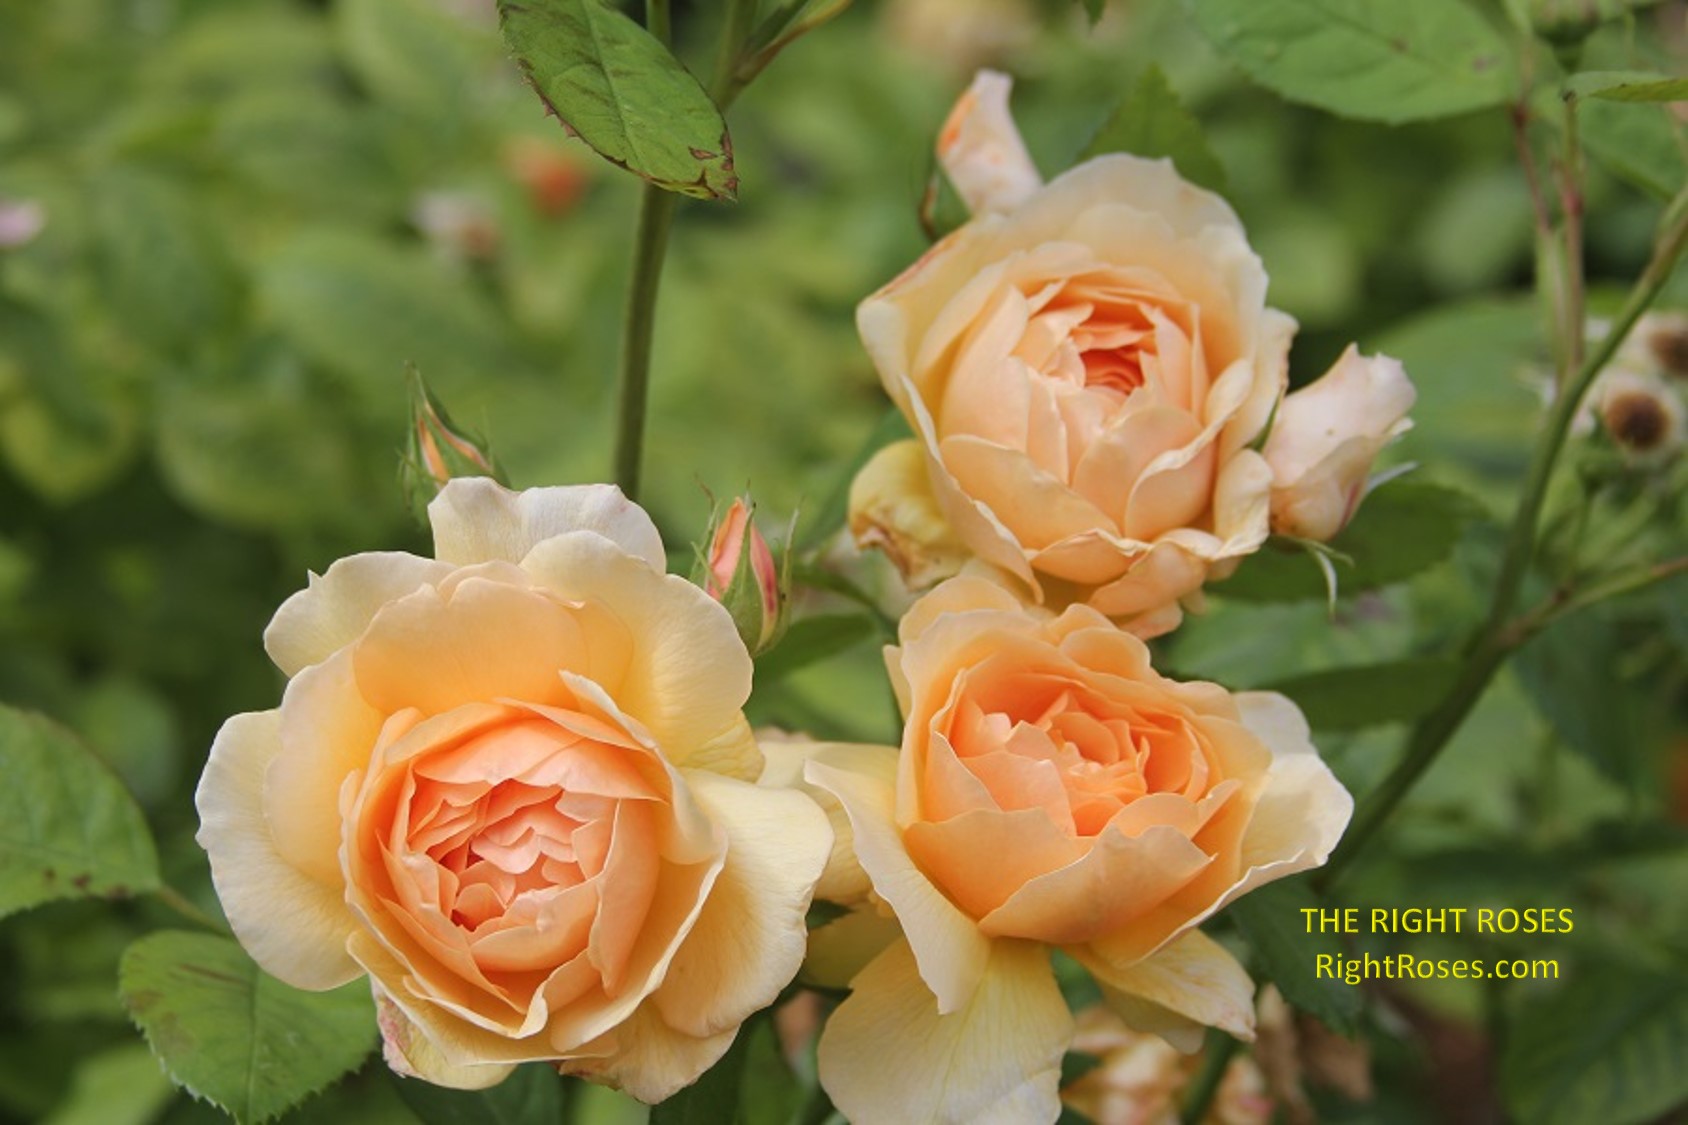 Grace rose review the right roses score best top garden store david austin english roses rose products rose rating the right leap rose food fertilizer